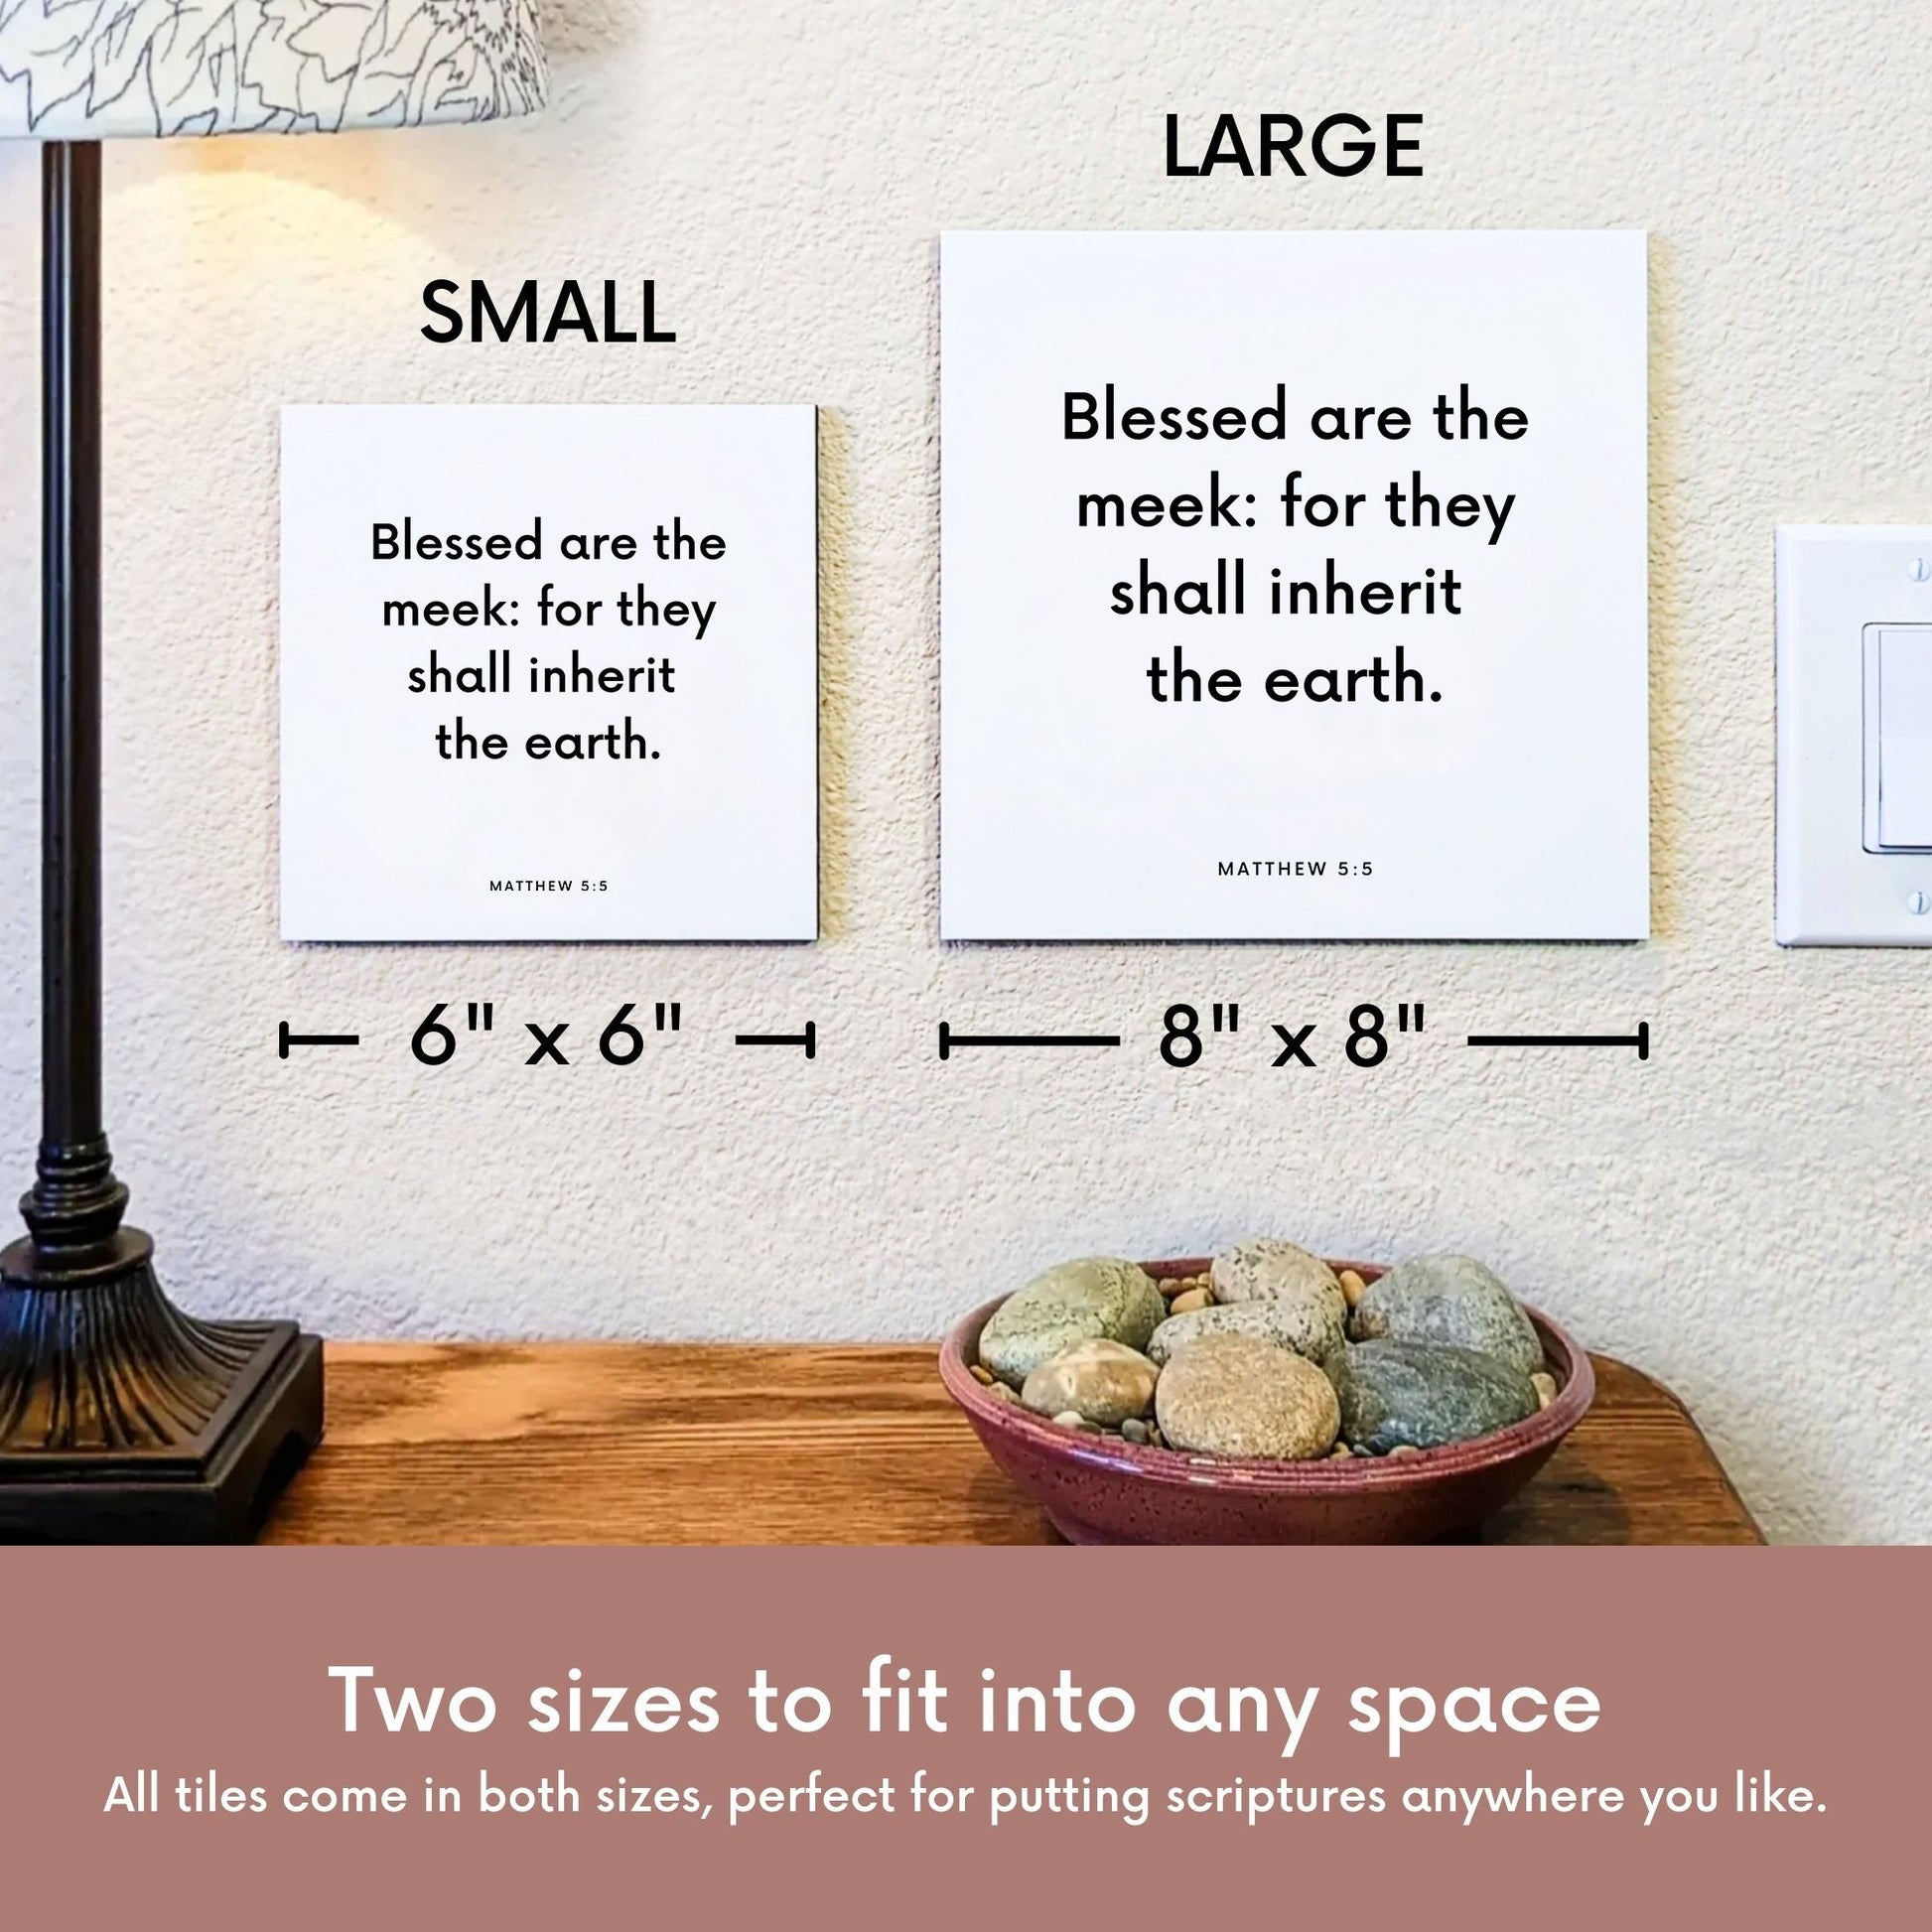 Scripture tile size comparison for Matthew 5:5 - "Blessed are the meek: for they shall inherit the earth"